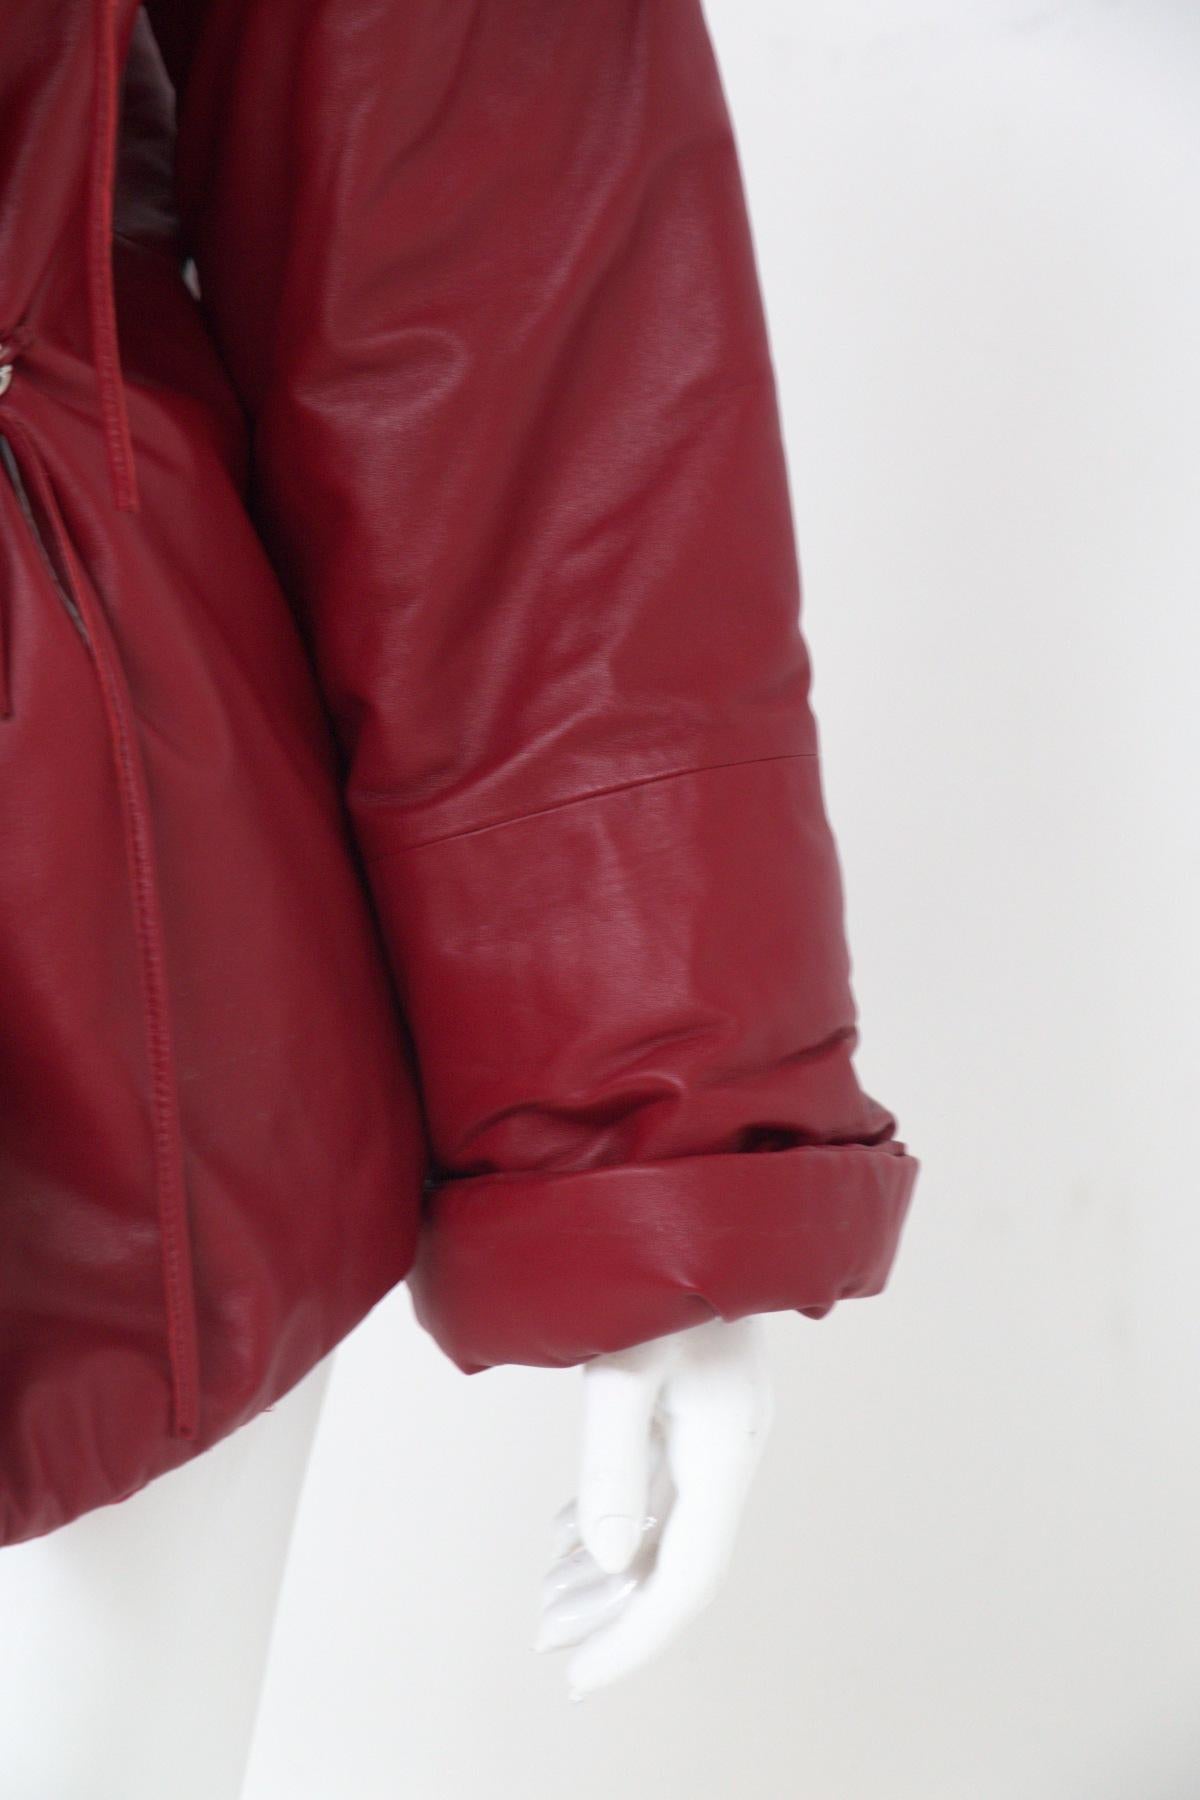 Women's Gianfranco Ferré Rare Oversized Red Leather Jacket For Sale